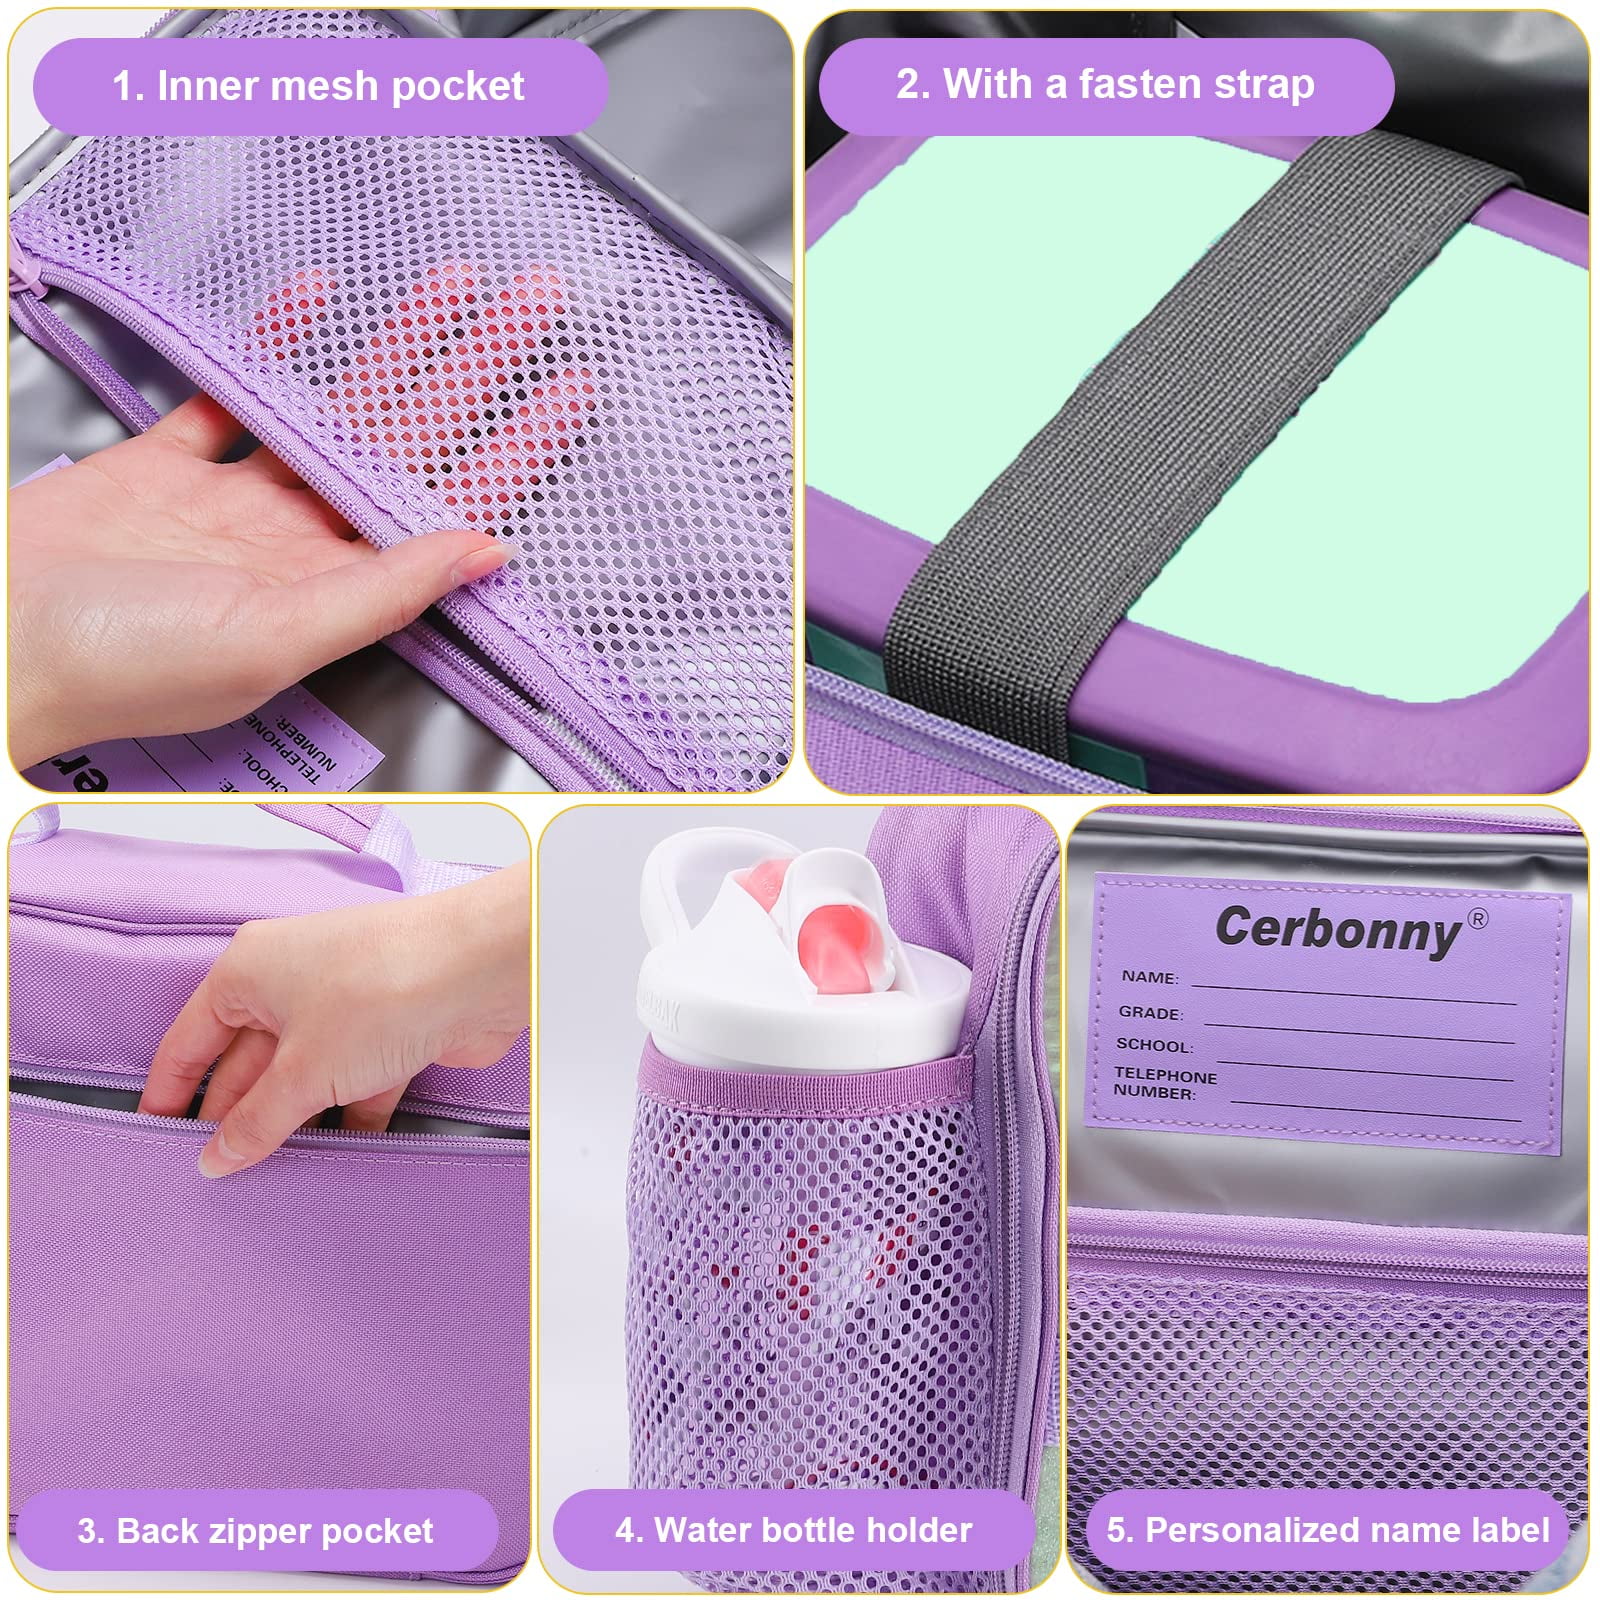 HIZUWKY Light Purple Solid Color Lunch Box Insulated Lunch Bag for Teens  Kids Boys Girls Women Lunchbox Reusable Lunch Pail Cooler for School Work